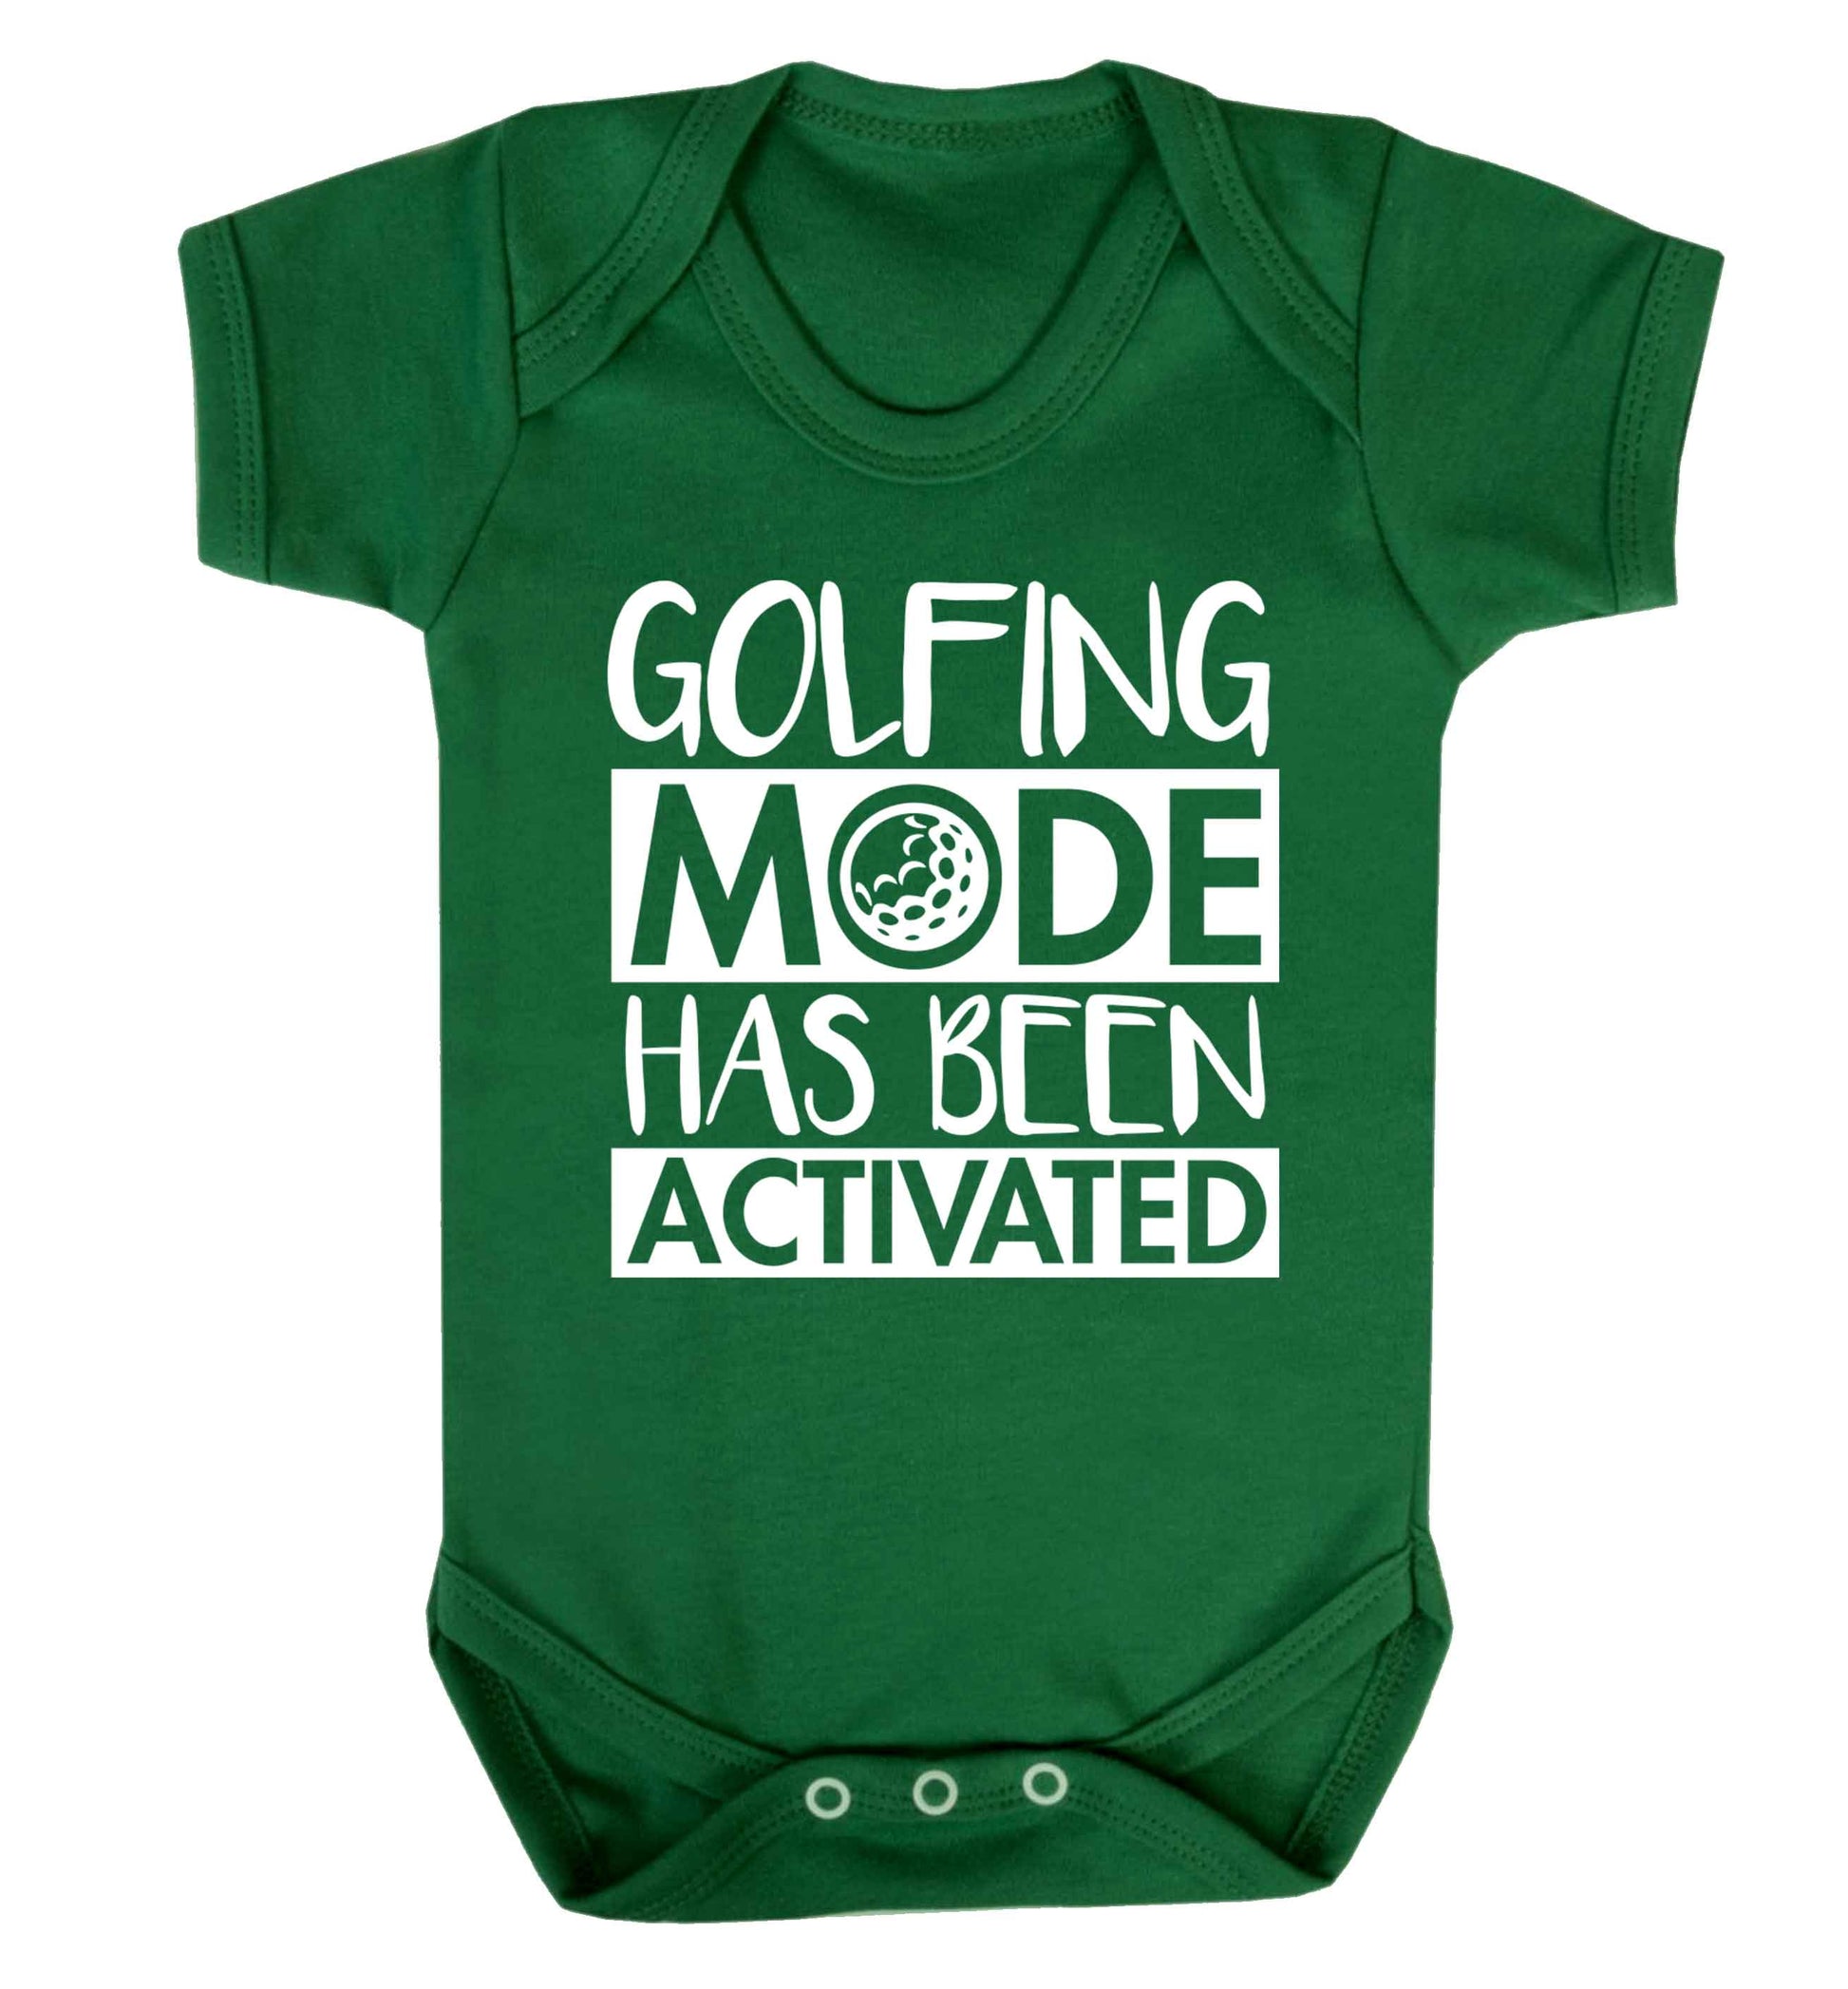 Golfing mode has been activated Baby Vest green 18-24 months